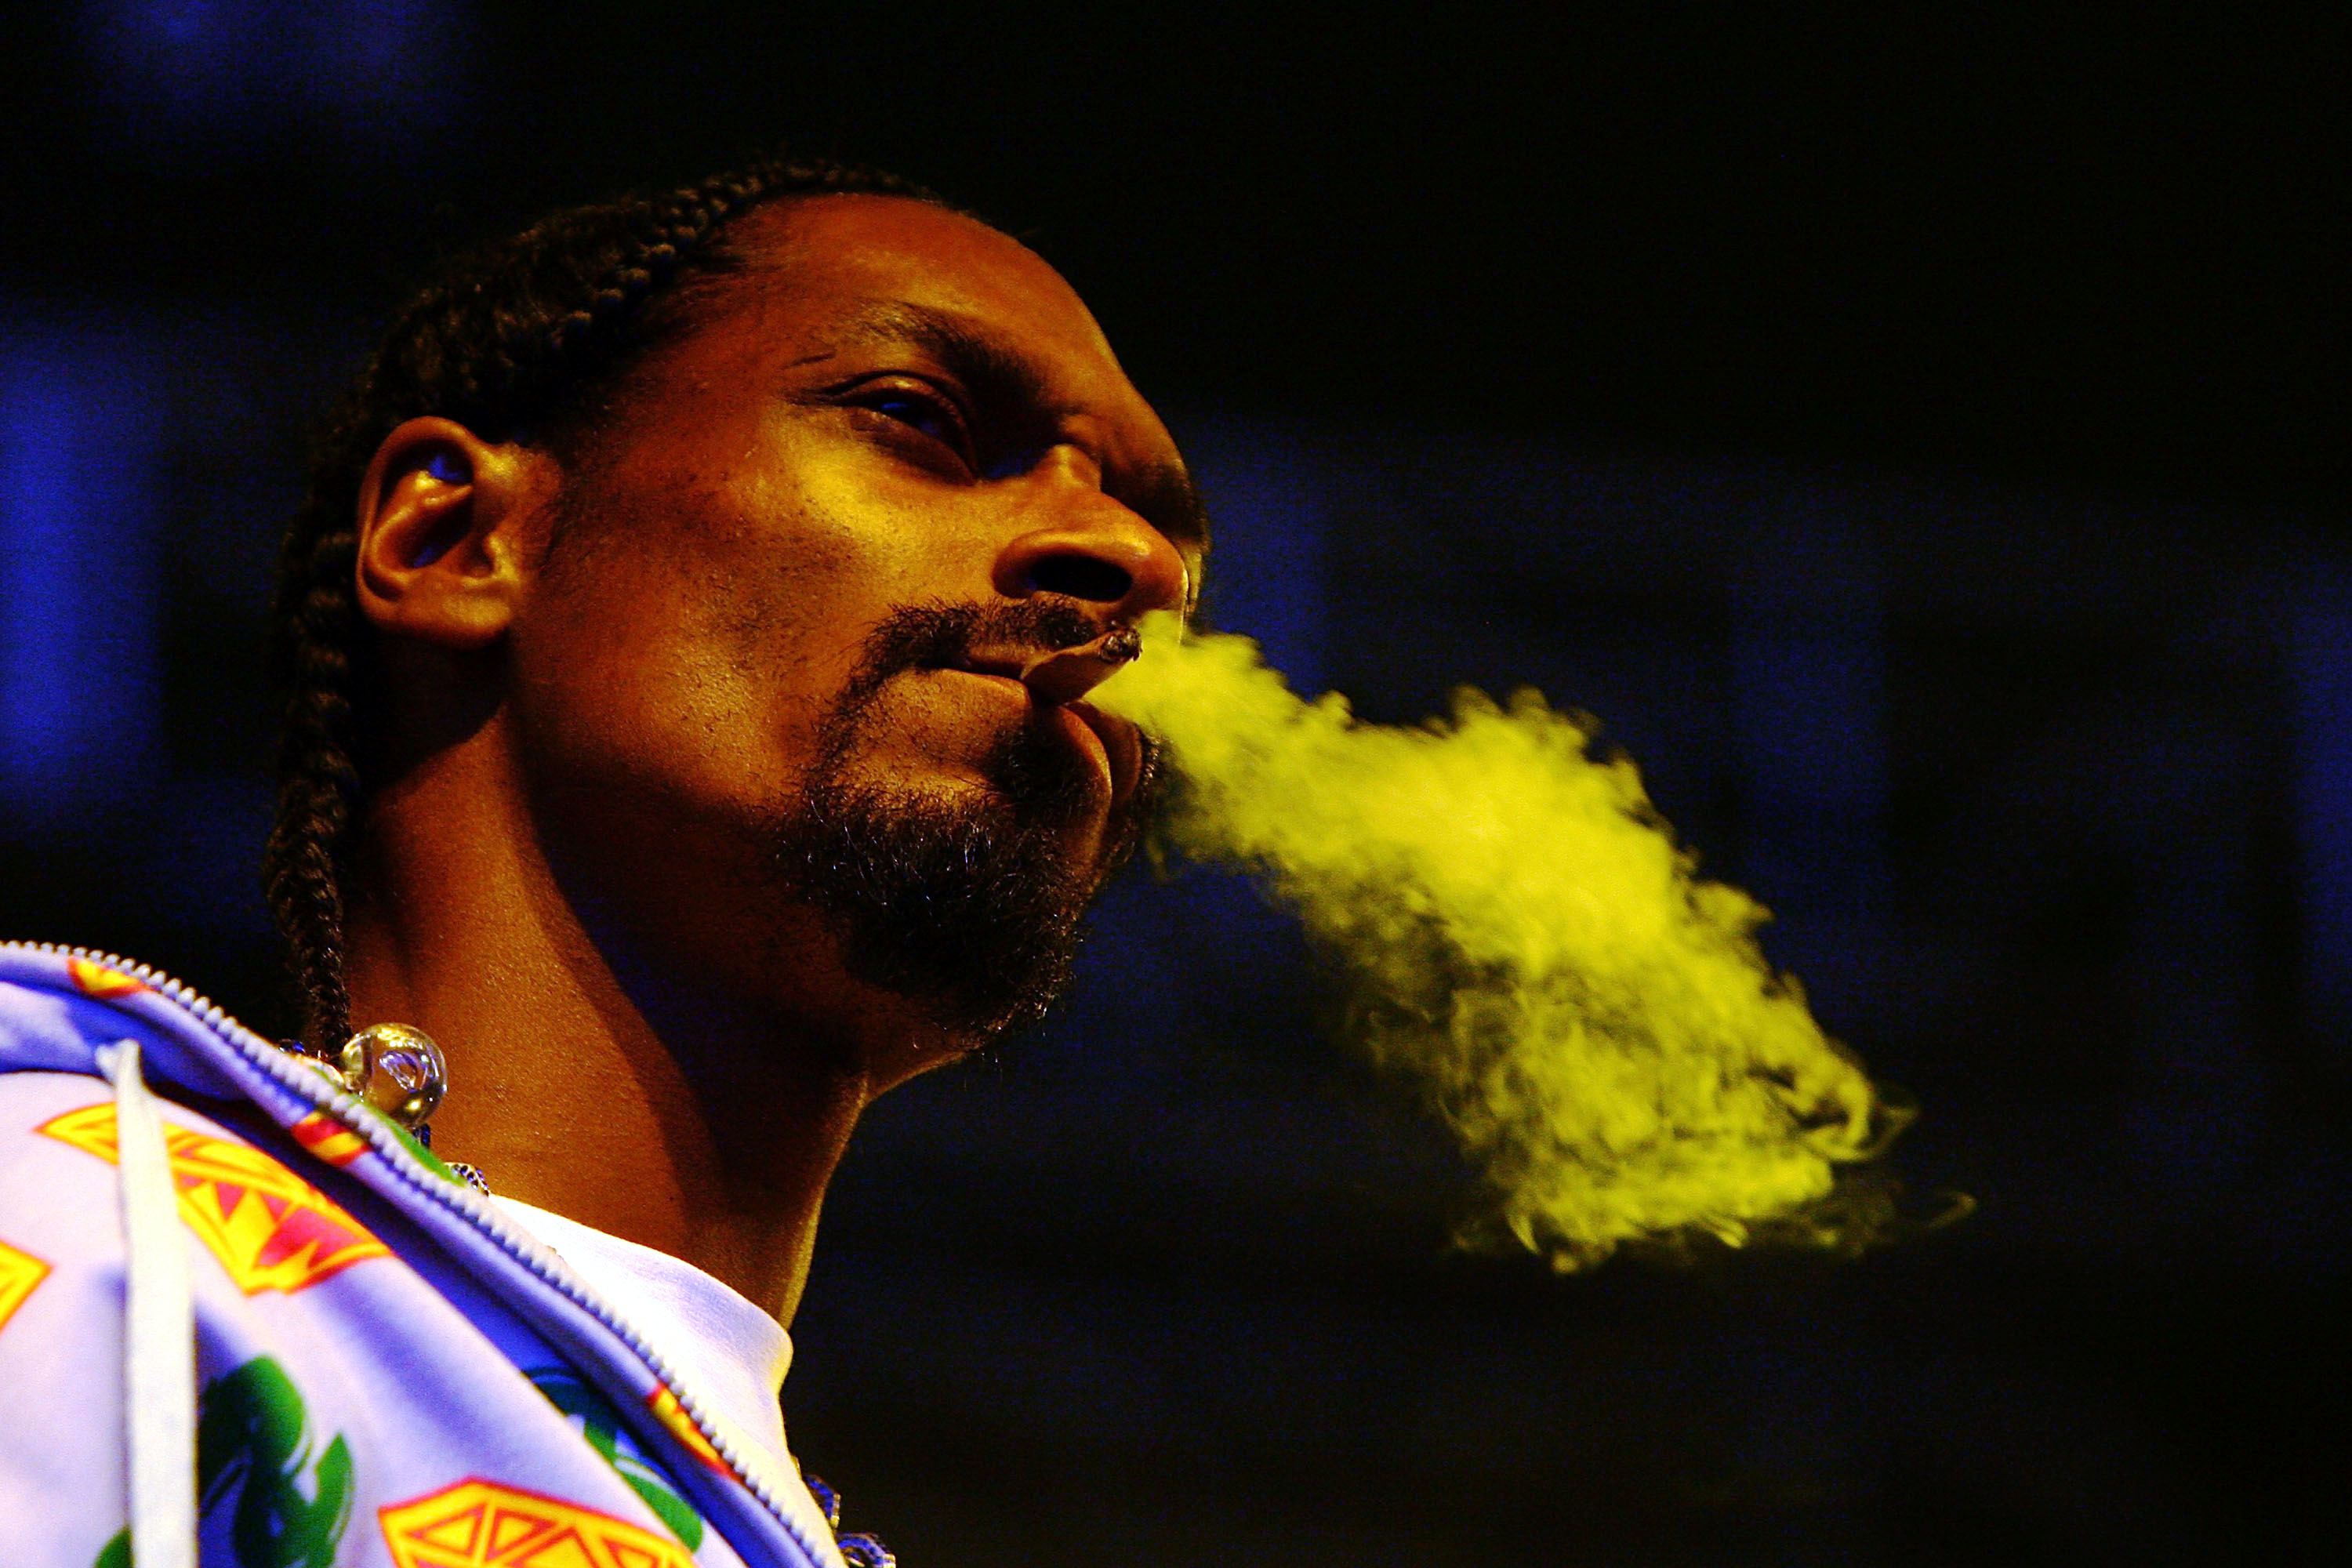 Rapper Snoop Dogg smokes while performing at the Melbourne stop of the Good Vibrations Festival 2007 in Melbourne, Australia | Kristian Dowling/Getty Images